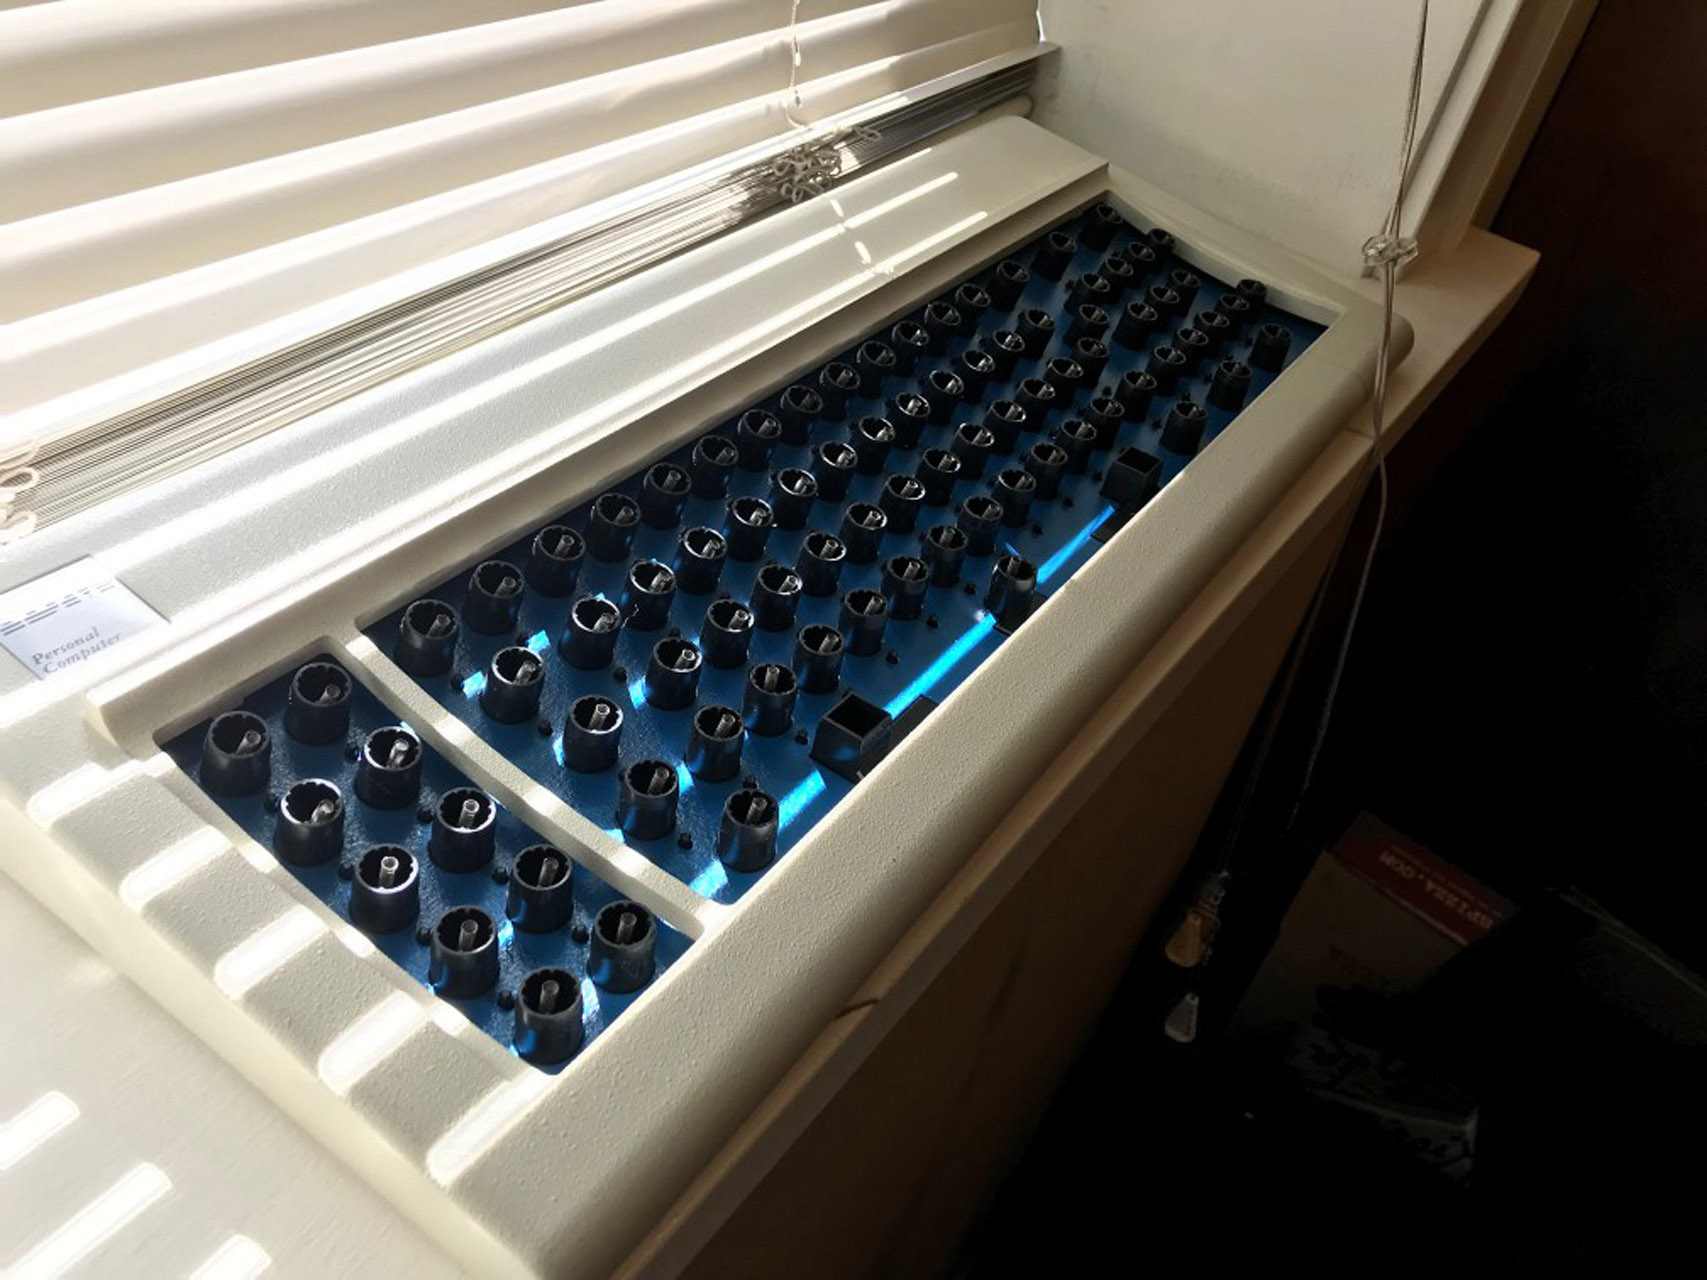 Finished Keyboard Without Caps